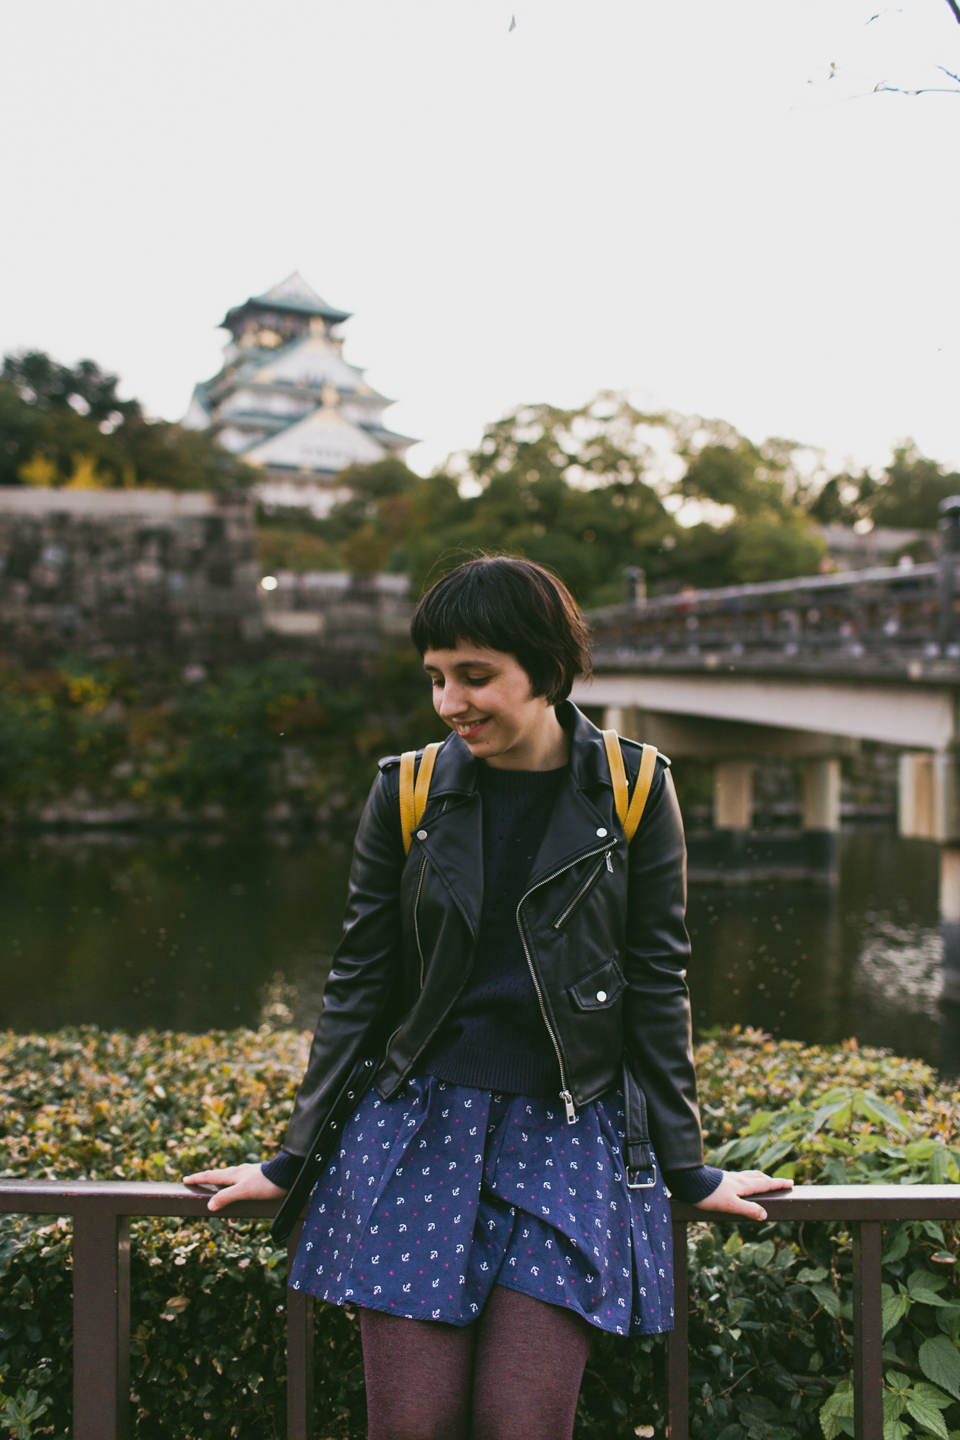 Osaka castle - The cat, you and us